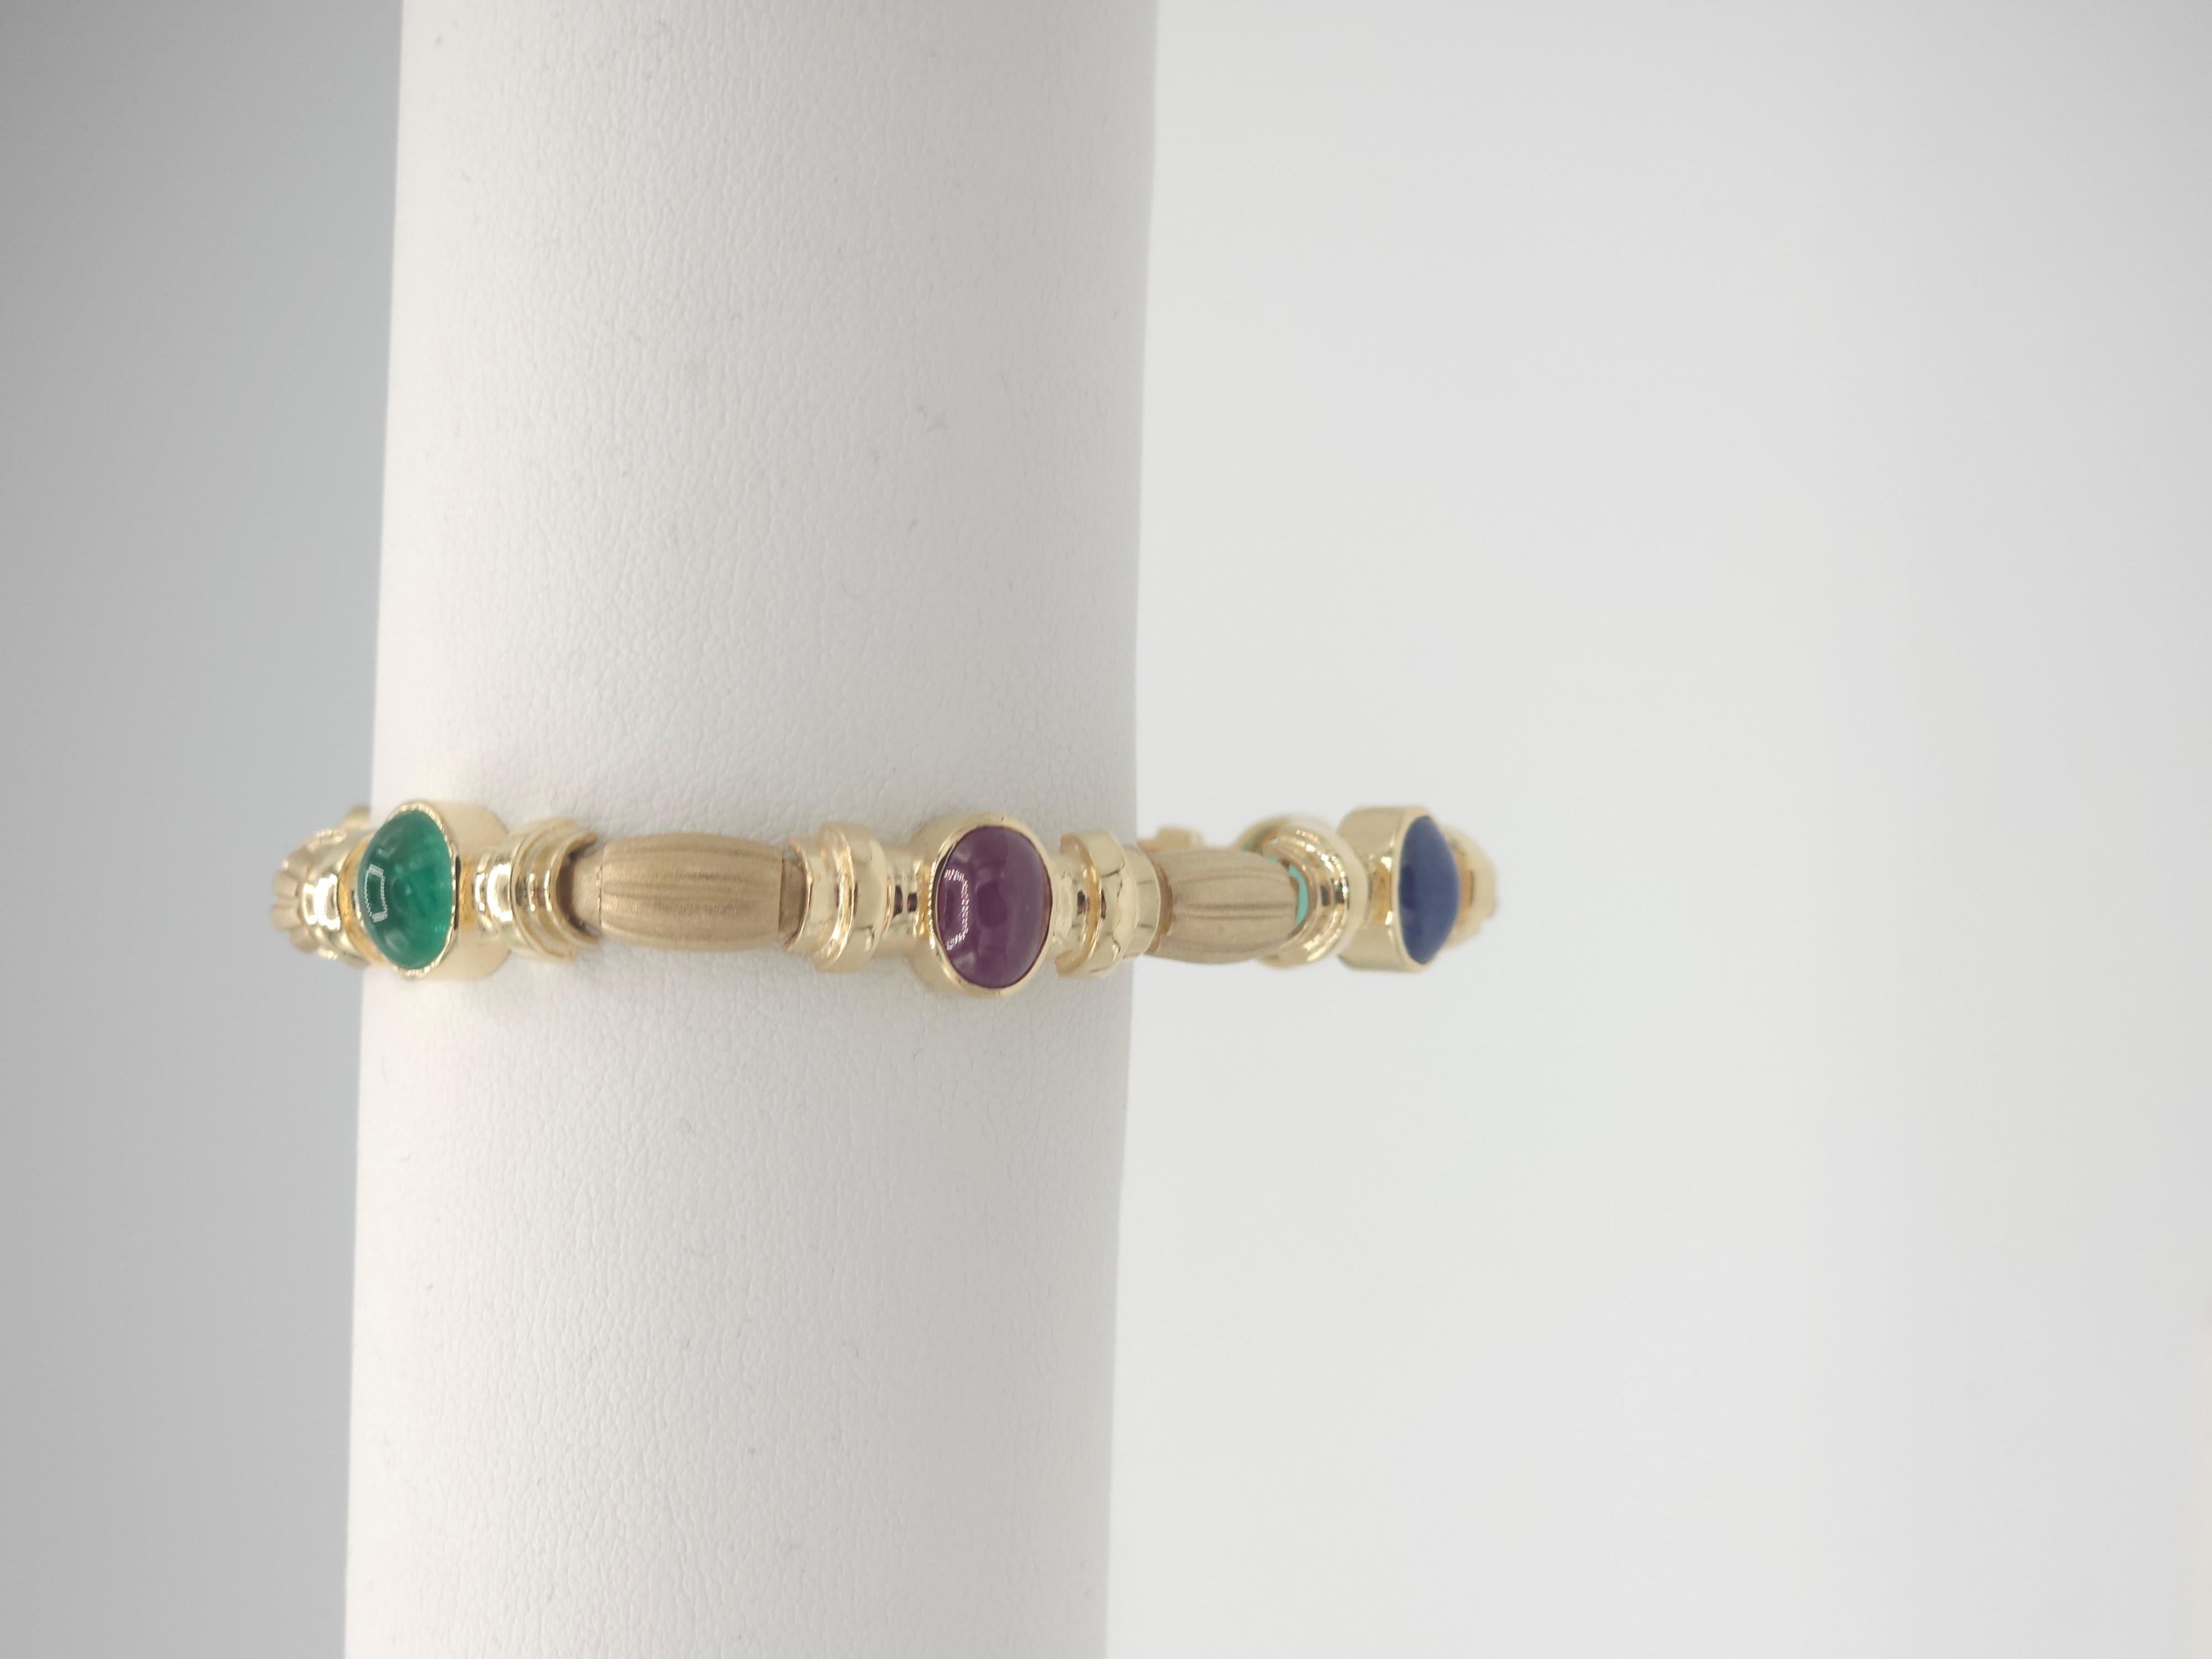 NEW Natural Ruby, Sapphire, Emerald Bracelet in 14k Solid Yellow Gold New For Sale 9